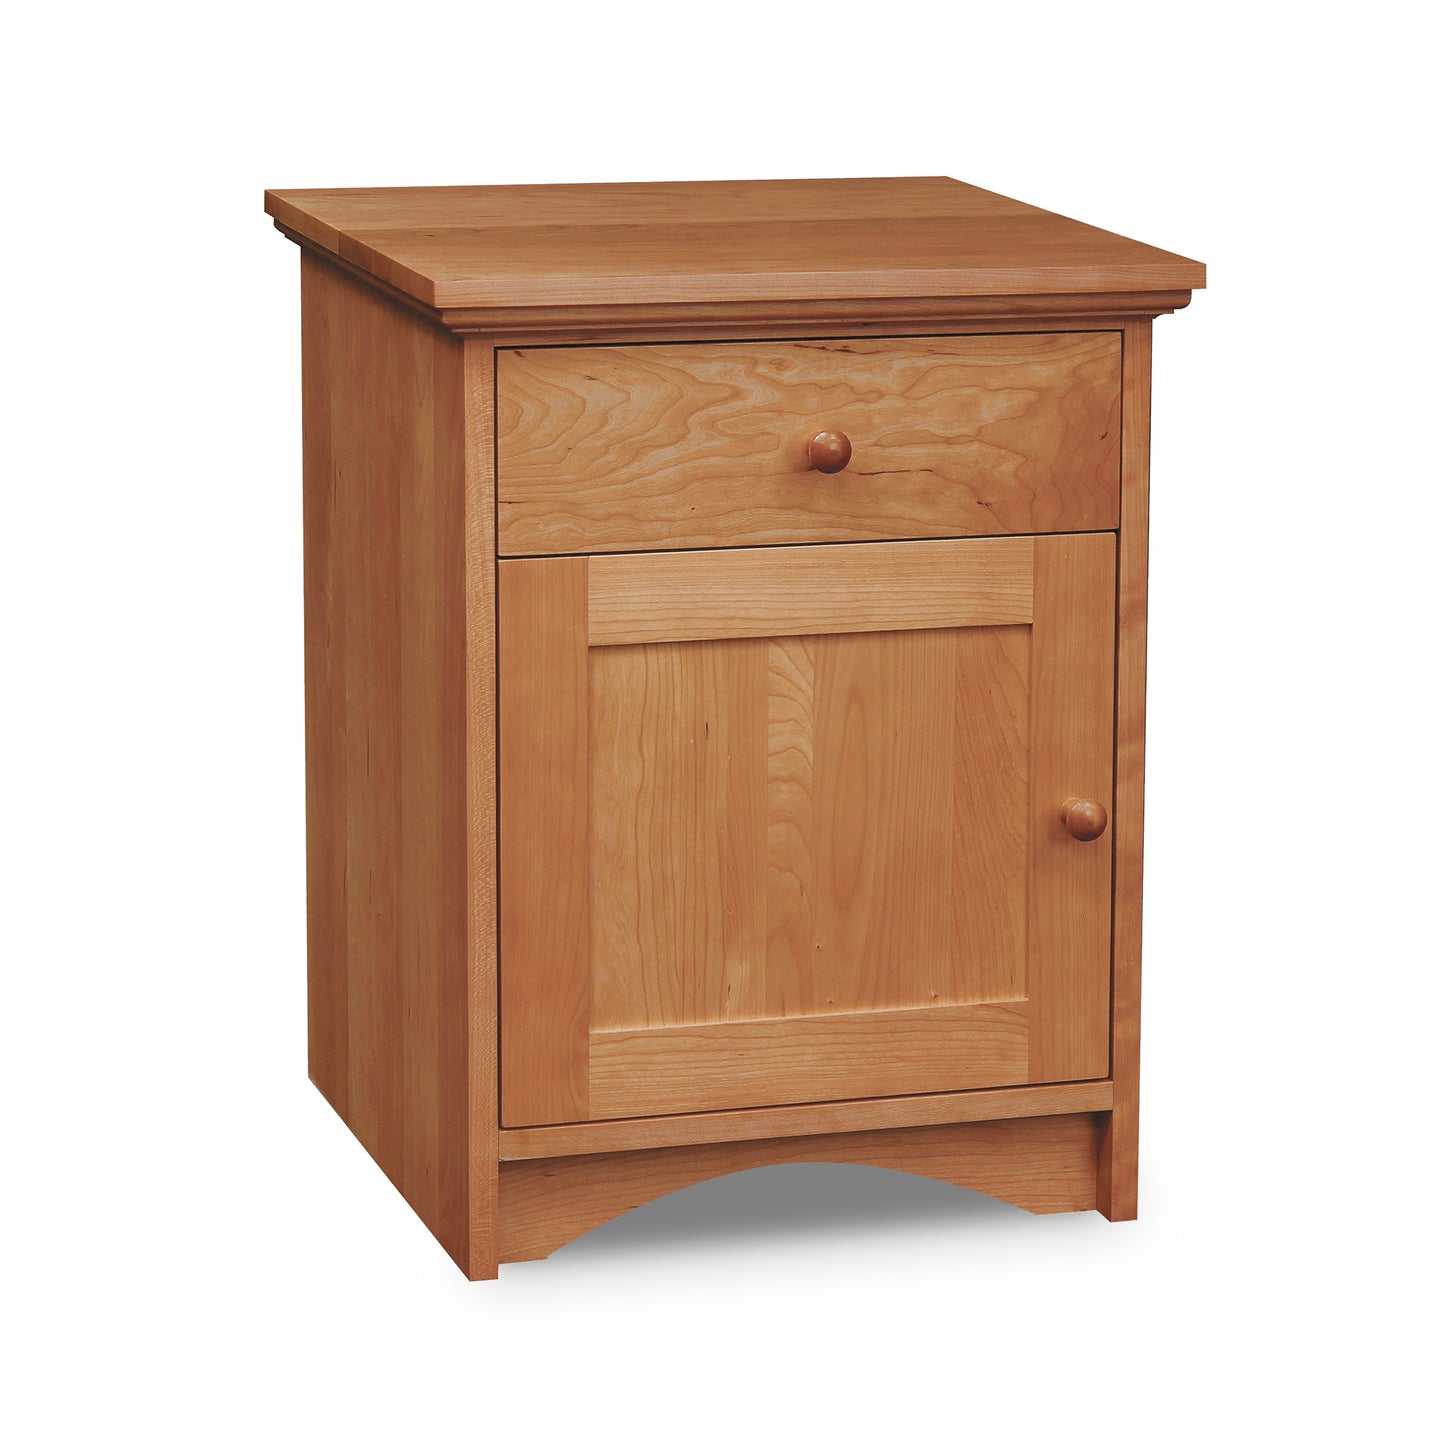 This Lyndon Furniture New England Shaker 1-Drawer Nightstand with Door and Arched Base features a small wooden nightstand with a drawer, crafted from hardwood.